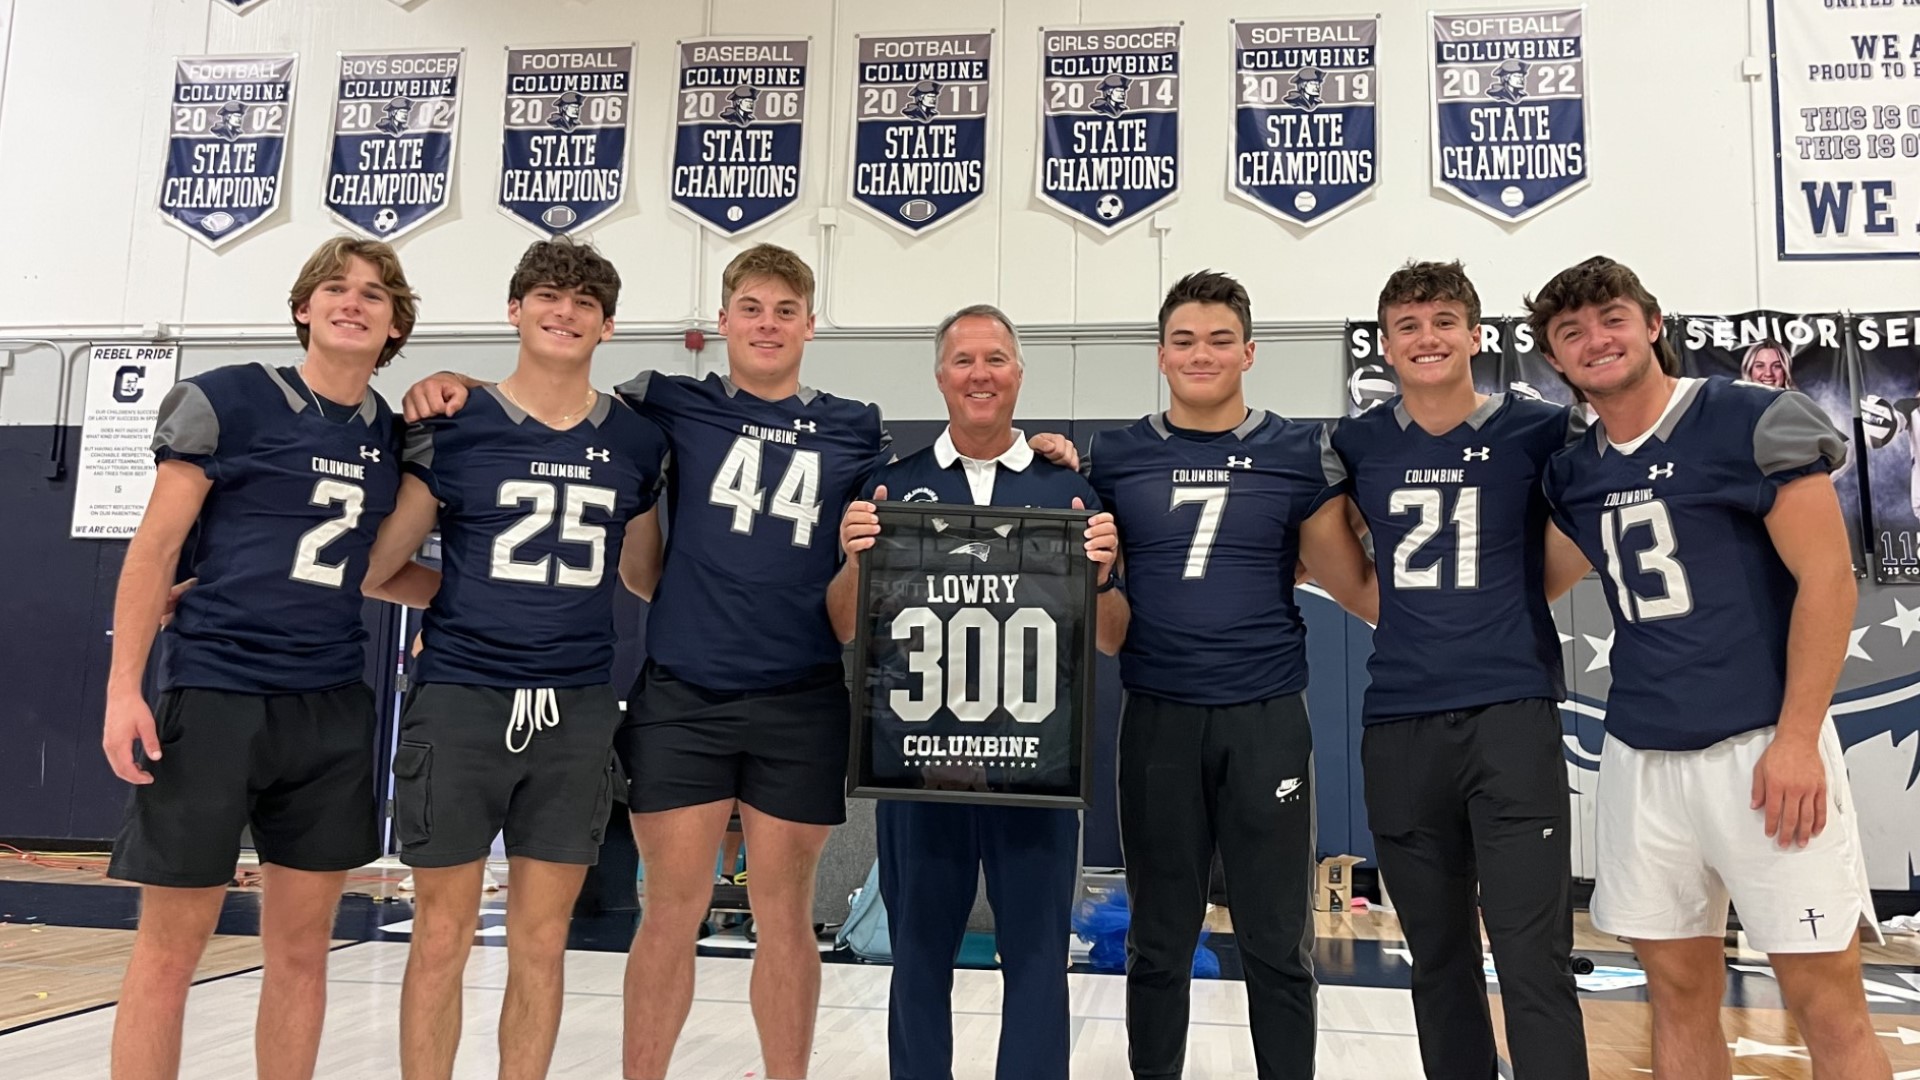 Columbine head coach Andy Lowry celebrates career win no. 300 at Columbine in year 30 with the program